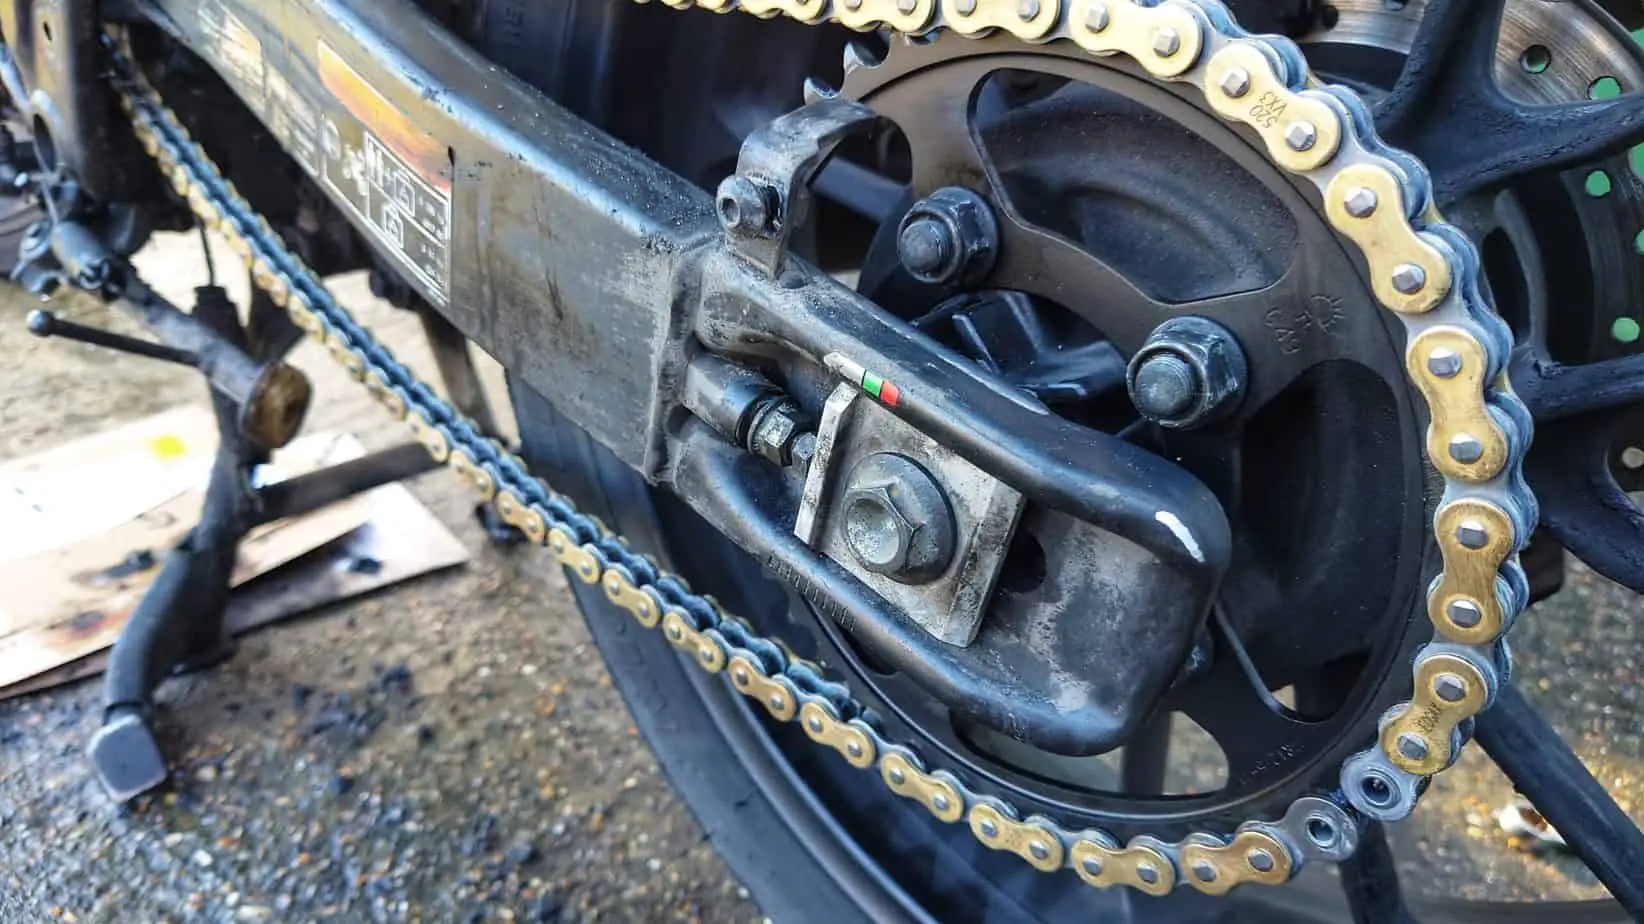 new chain meets correctly at the new rear sprocket